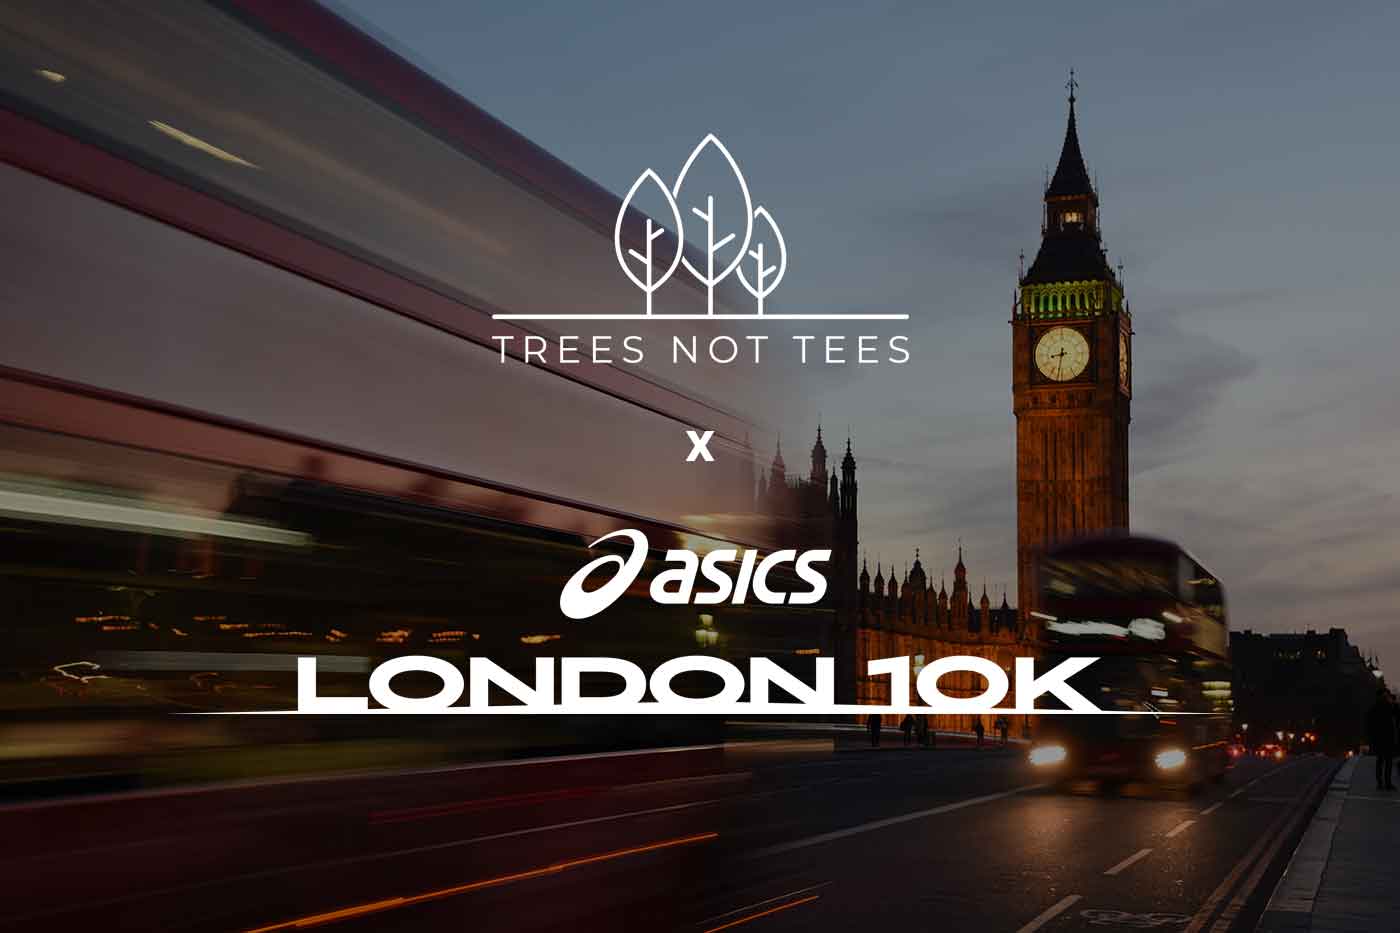 Trees Not Tees To Plant Trees In The For ASICS London 10K - Trees Not Tees